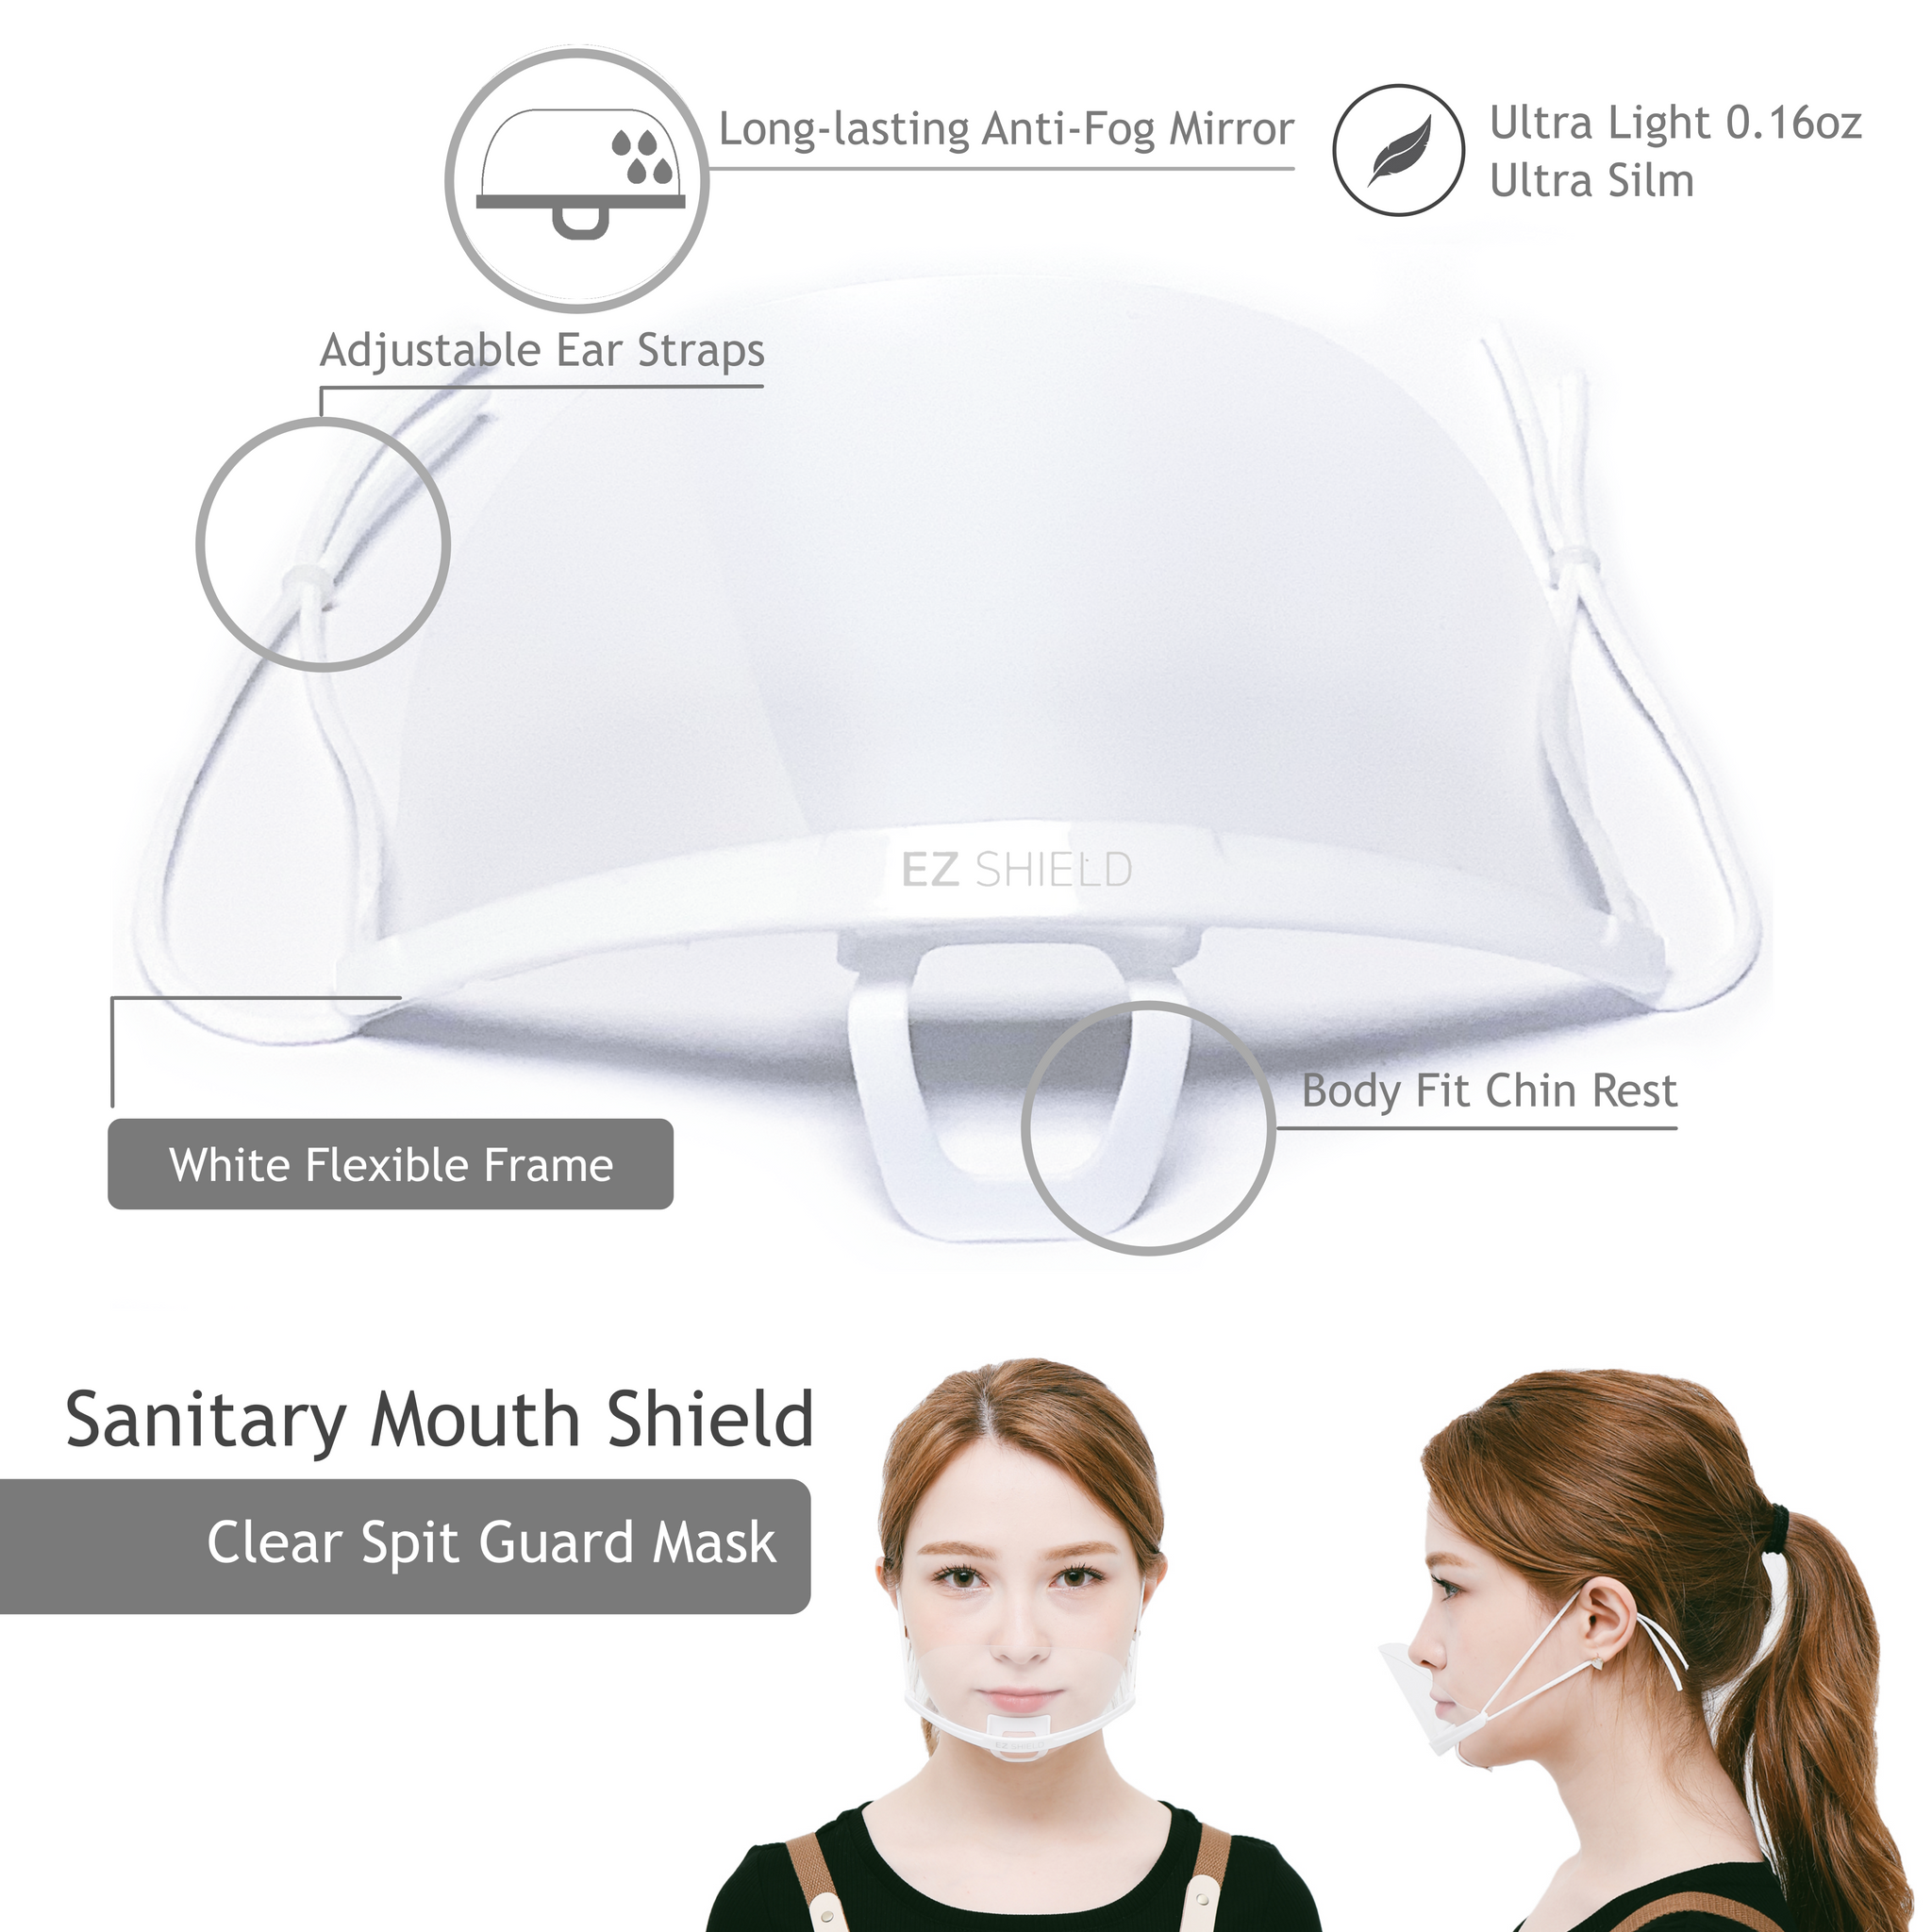 [2 PACK] Sanitary Mask Anti-Fog Transparent Spit Guard Mouth Shield Food Handlers